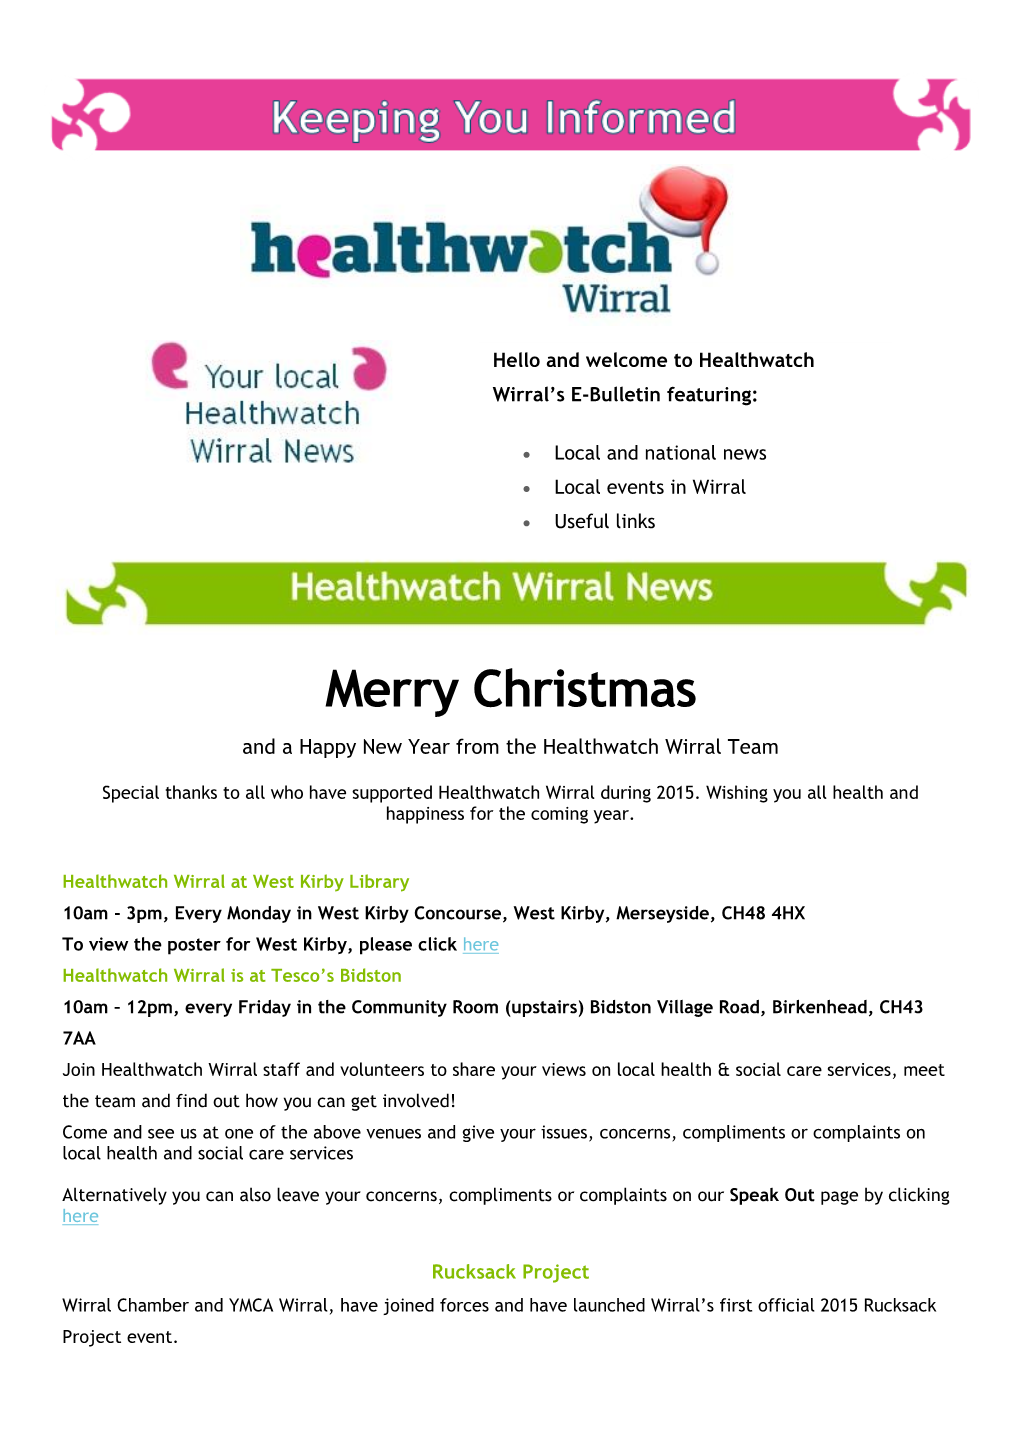 Merry Christmas and a Happy New Year from the Healthwatch Wirral Team